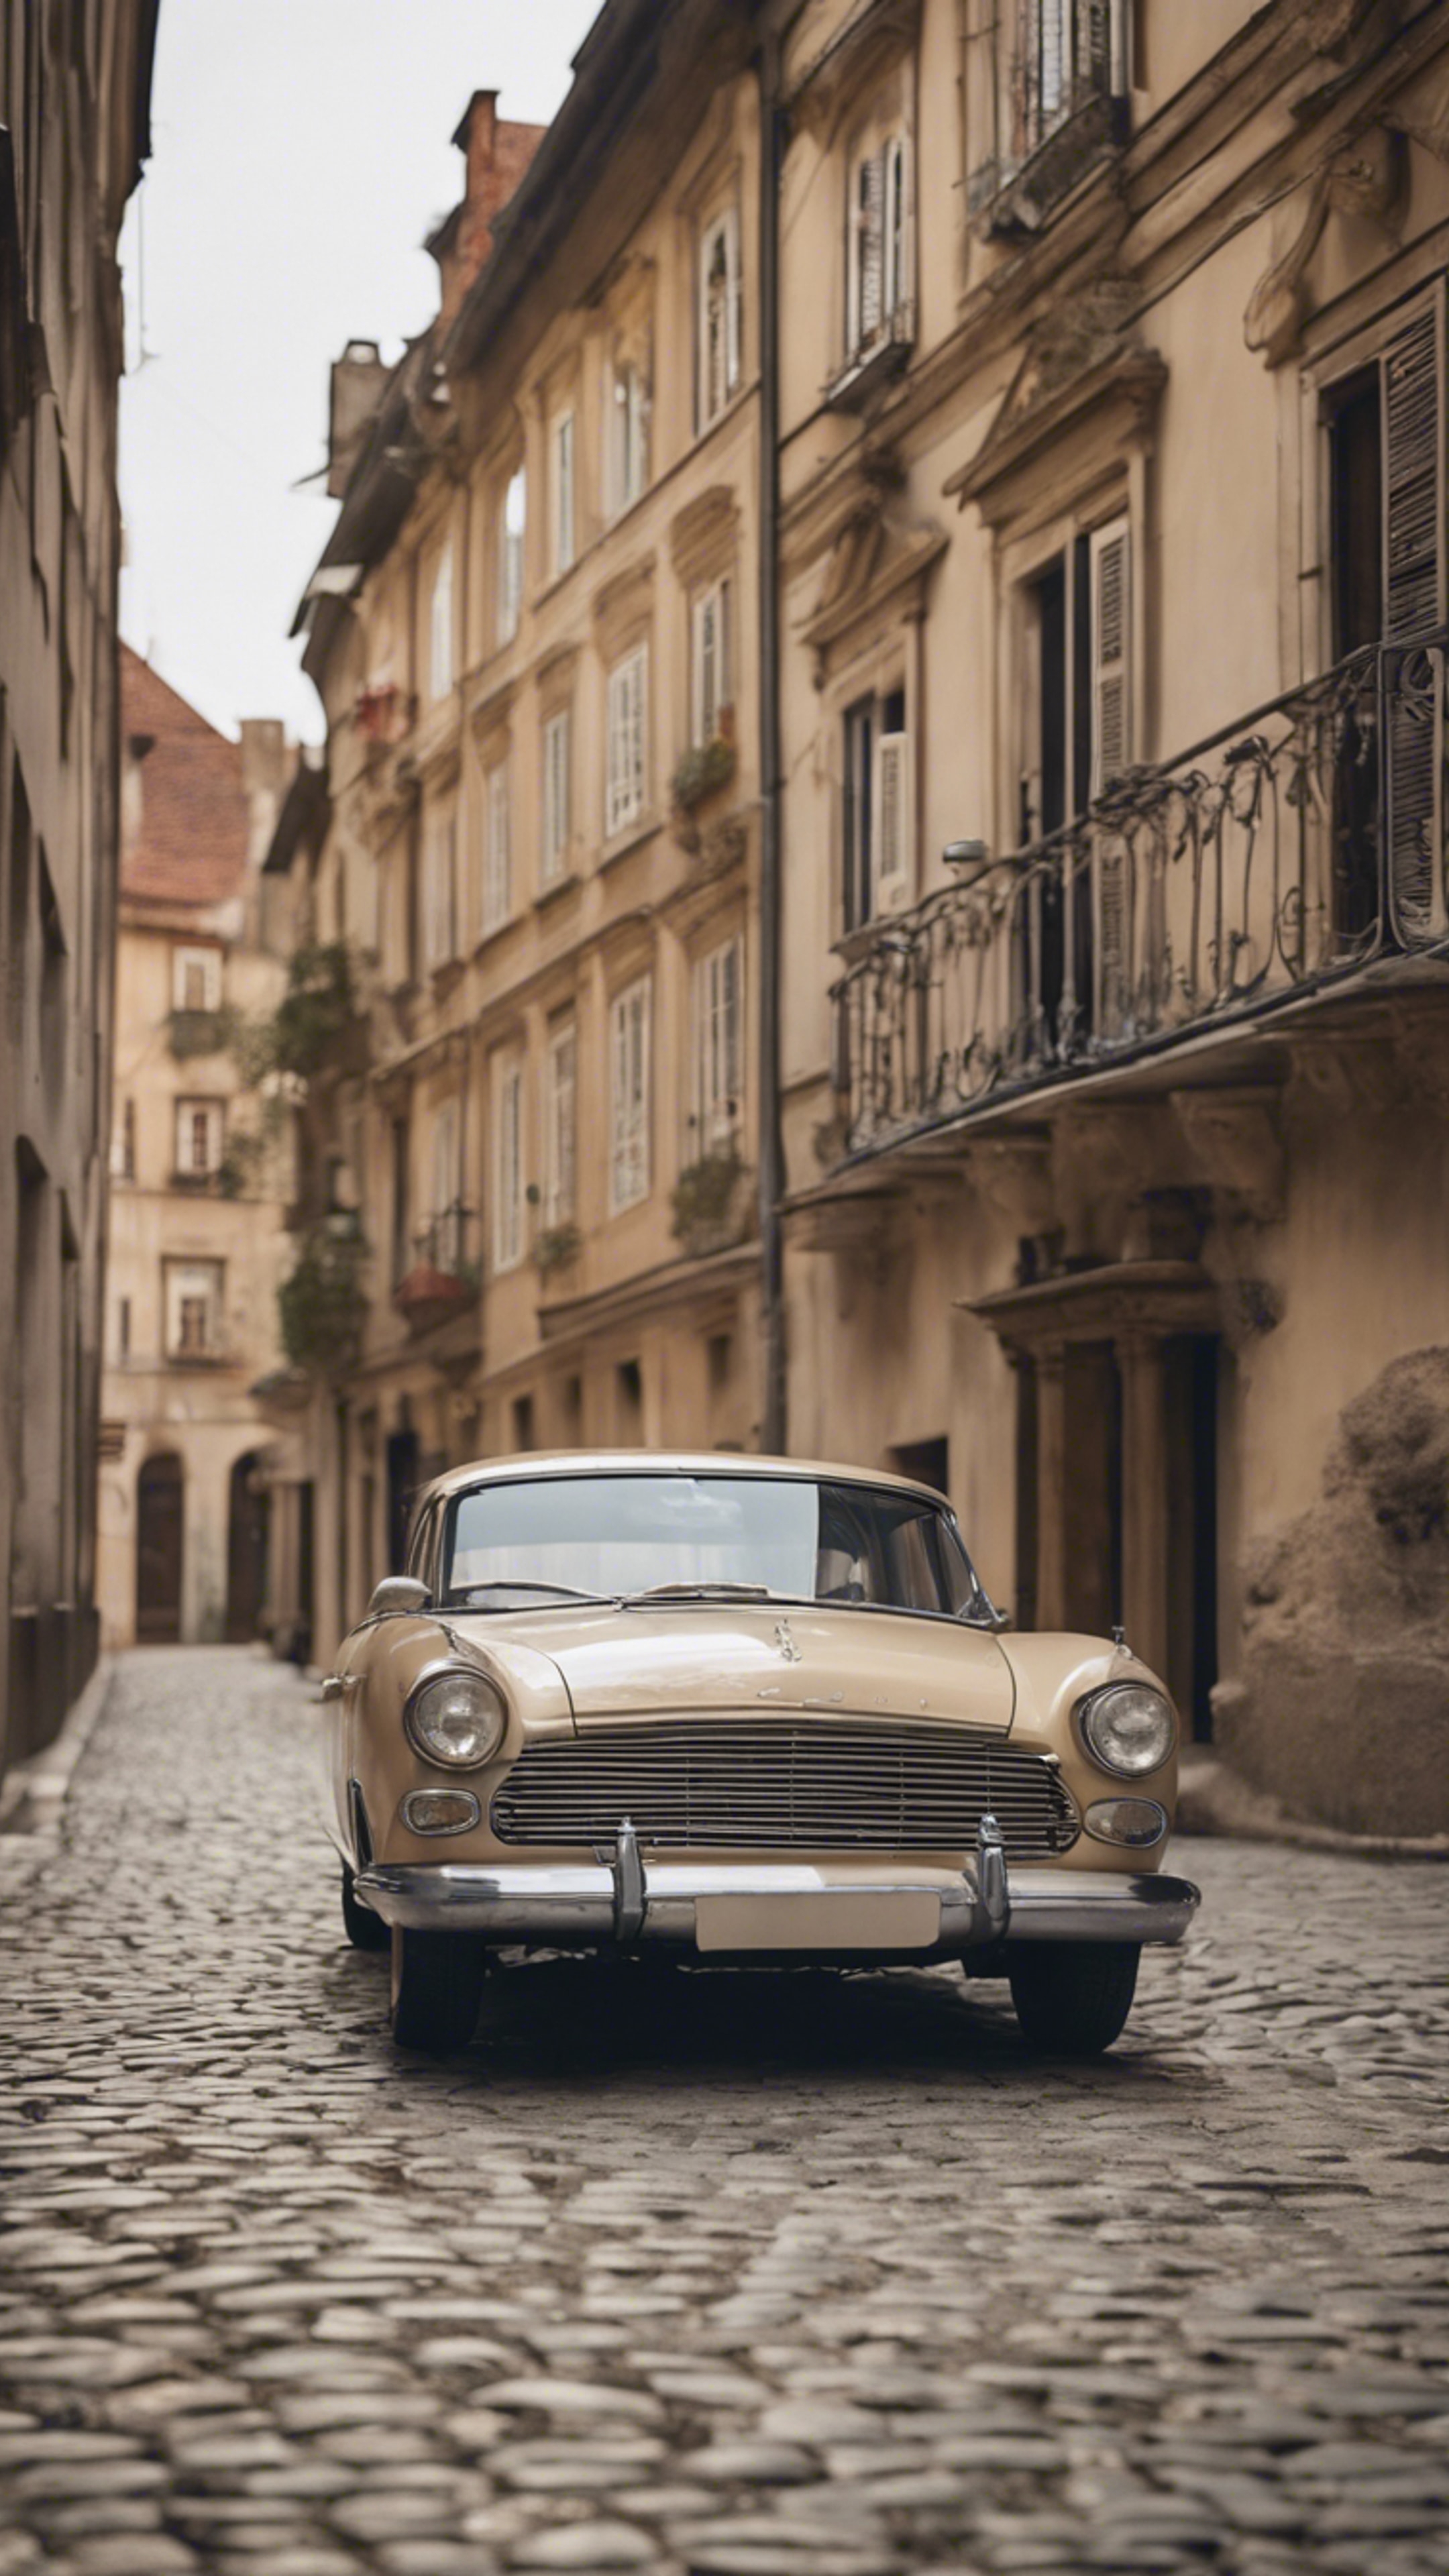 A beige classic car parked on a cobblestone street with rustic buildings in the background. Tapeta[31a873a8b96b4be69c6a]